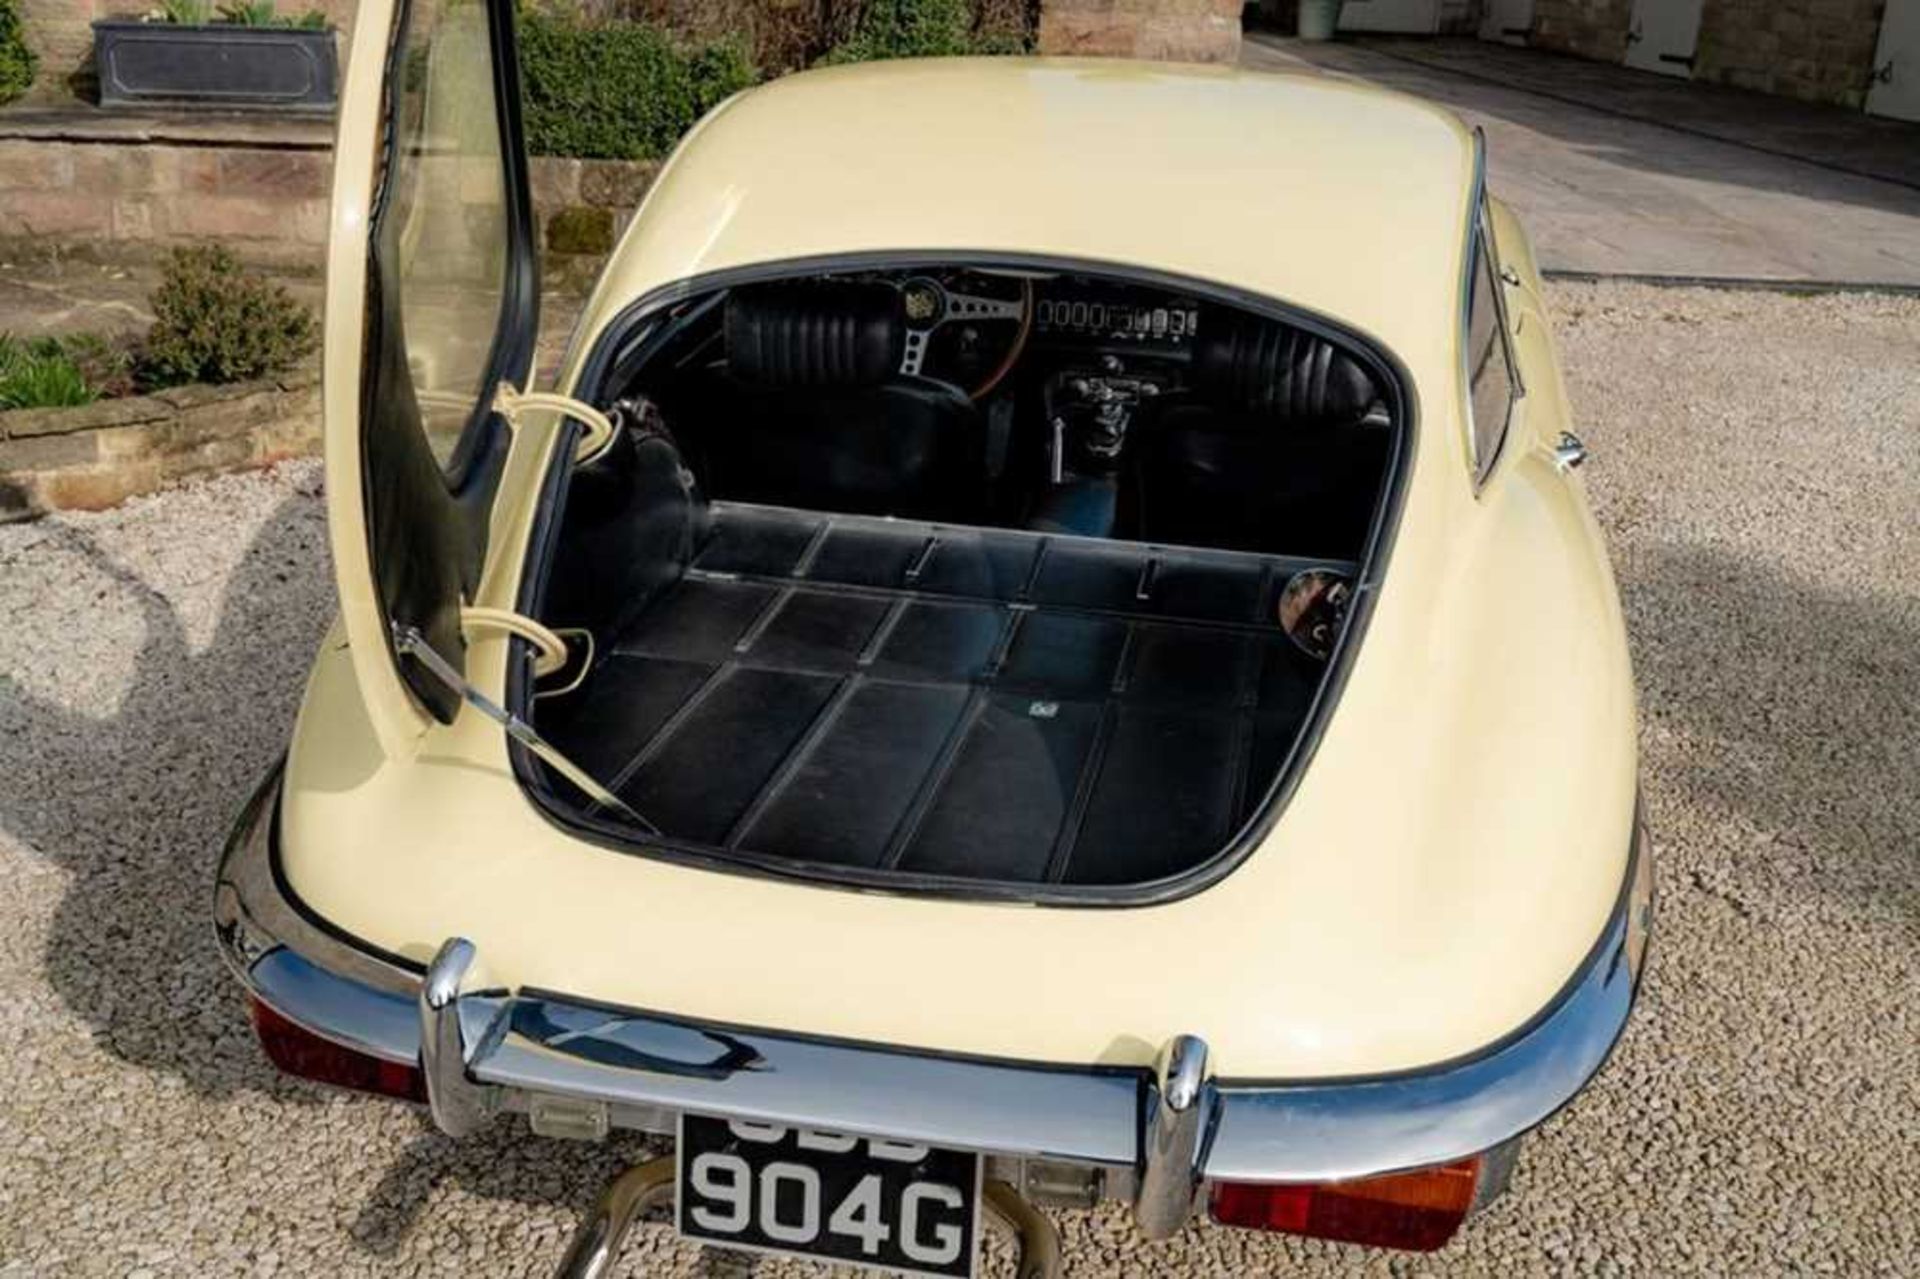 1968 Jaguar E-Type 4.2 Litre Coupe Genuine 44,000 miles from new - Image 8 of 68